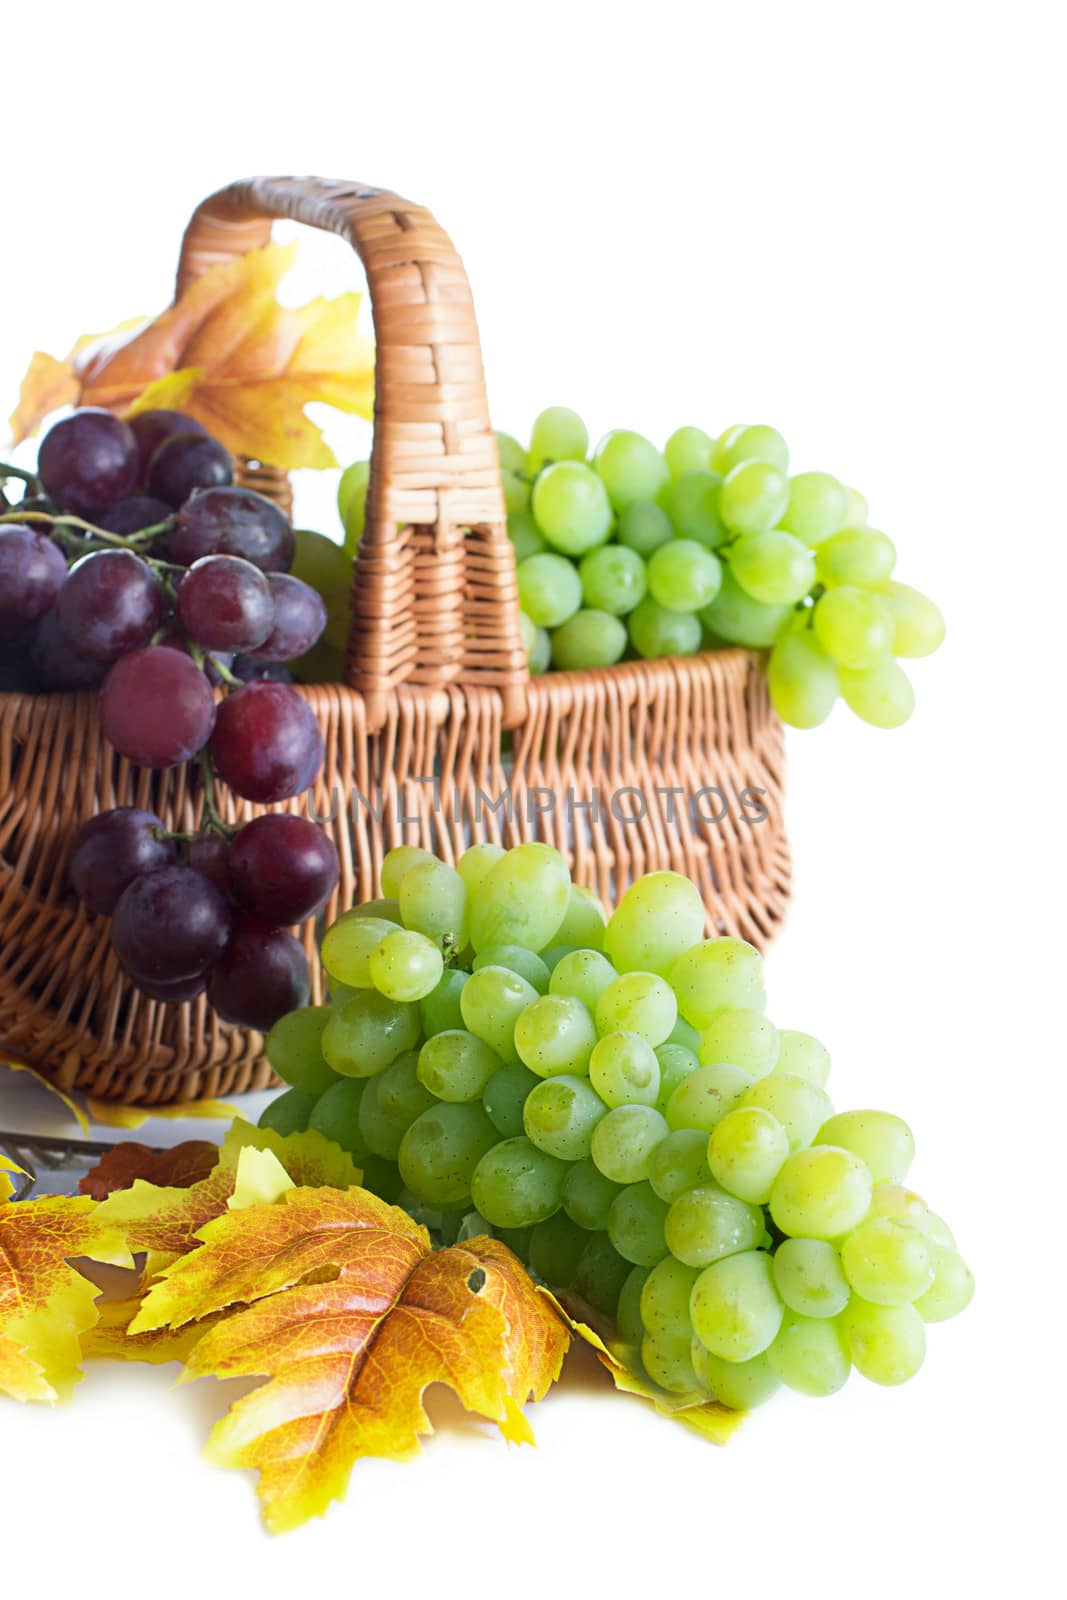 Green and dark grape in the basket by Angel_a